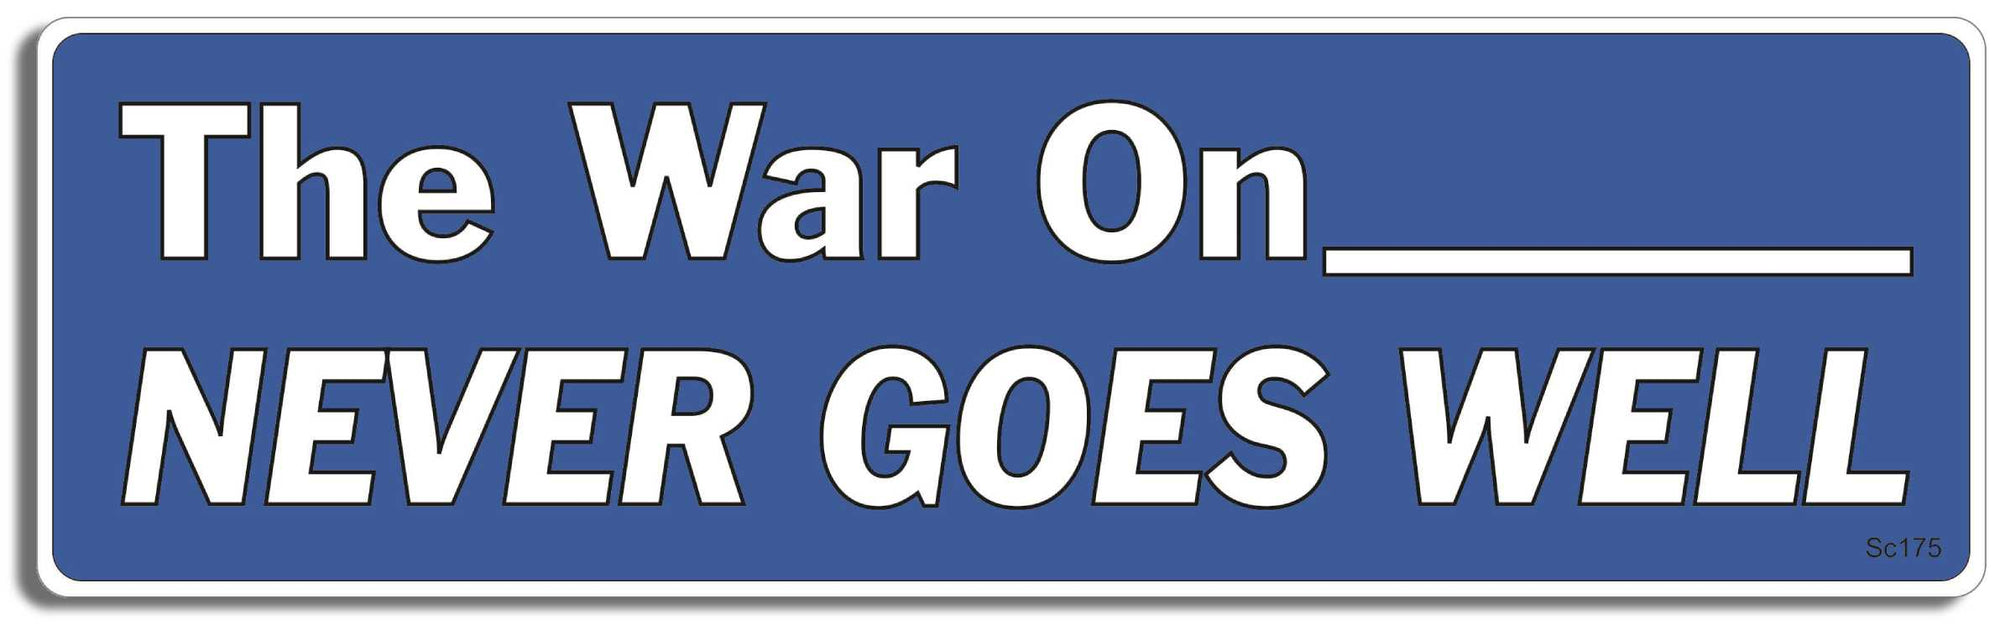 The War On_______ Never Goes Well - 3" x 10" -  Decal Bumper Sticker-political Bumper Sticker Car Magnet The War On_______ Never Goes Well-  Decal for carsconservative, liberal, Political